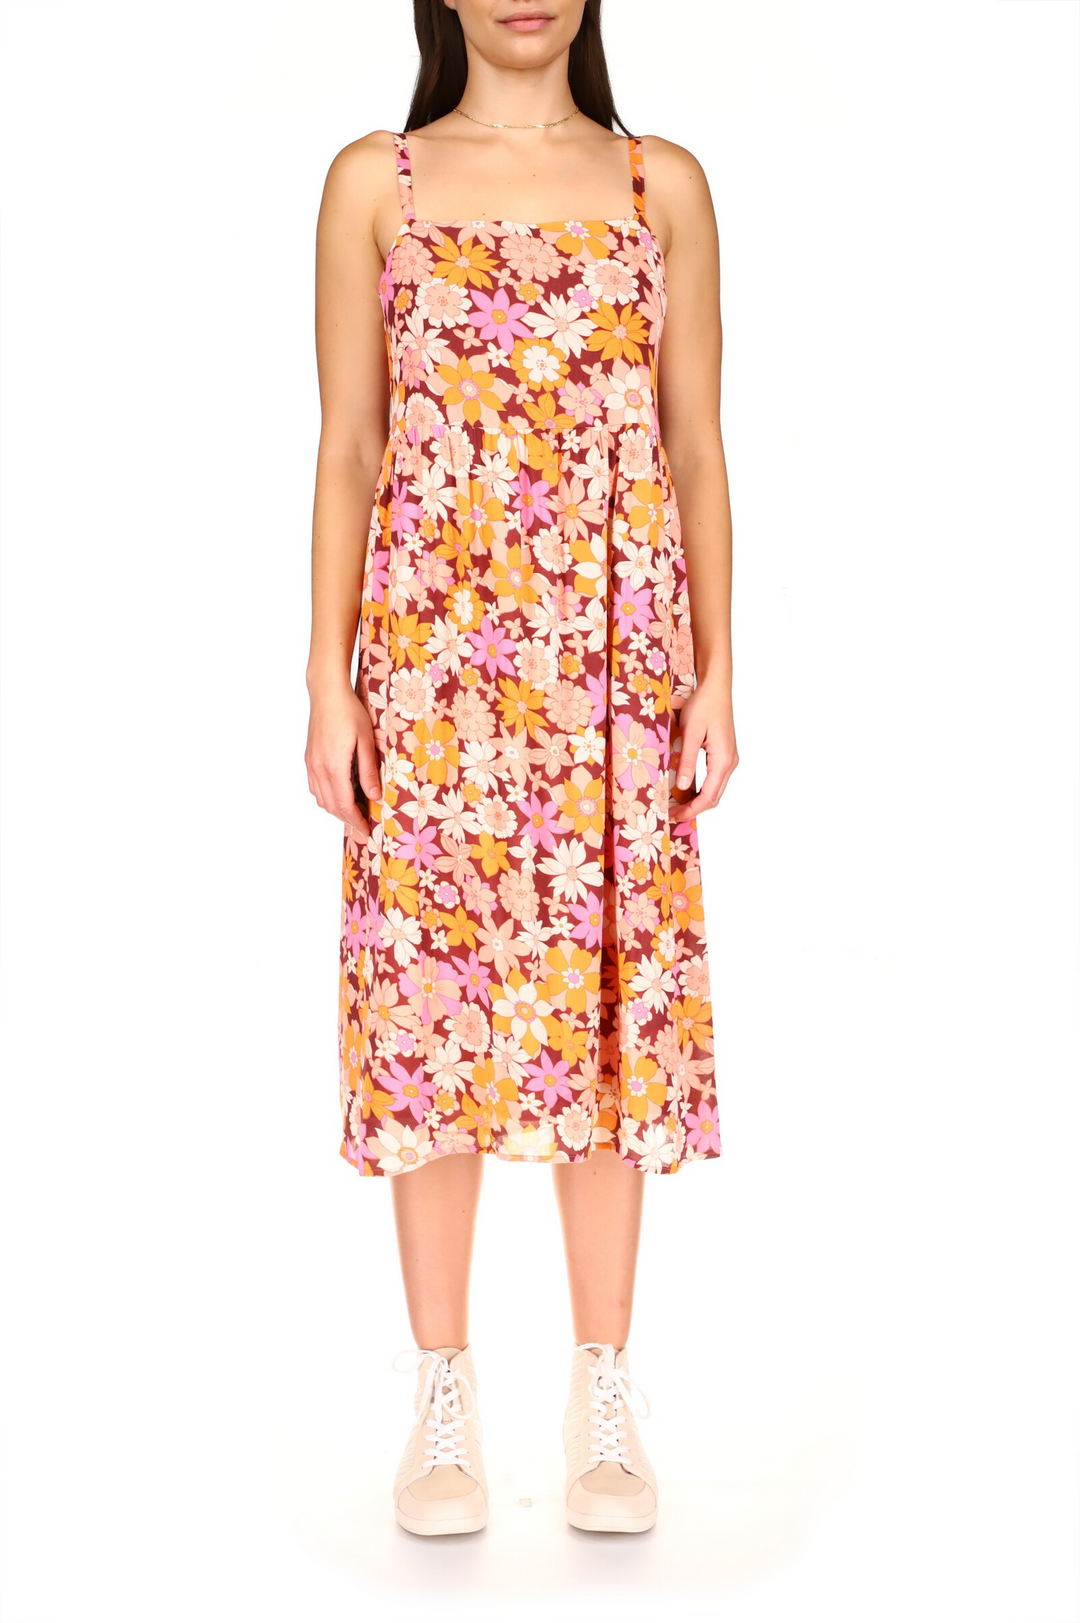 OUTDOOR FLORAL DAY IN THE PARK MIDI - Kingfisher Road - Online Boutique